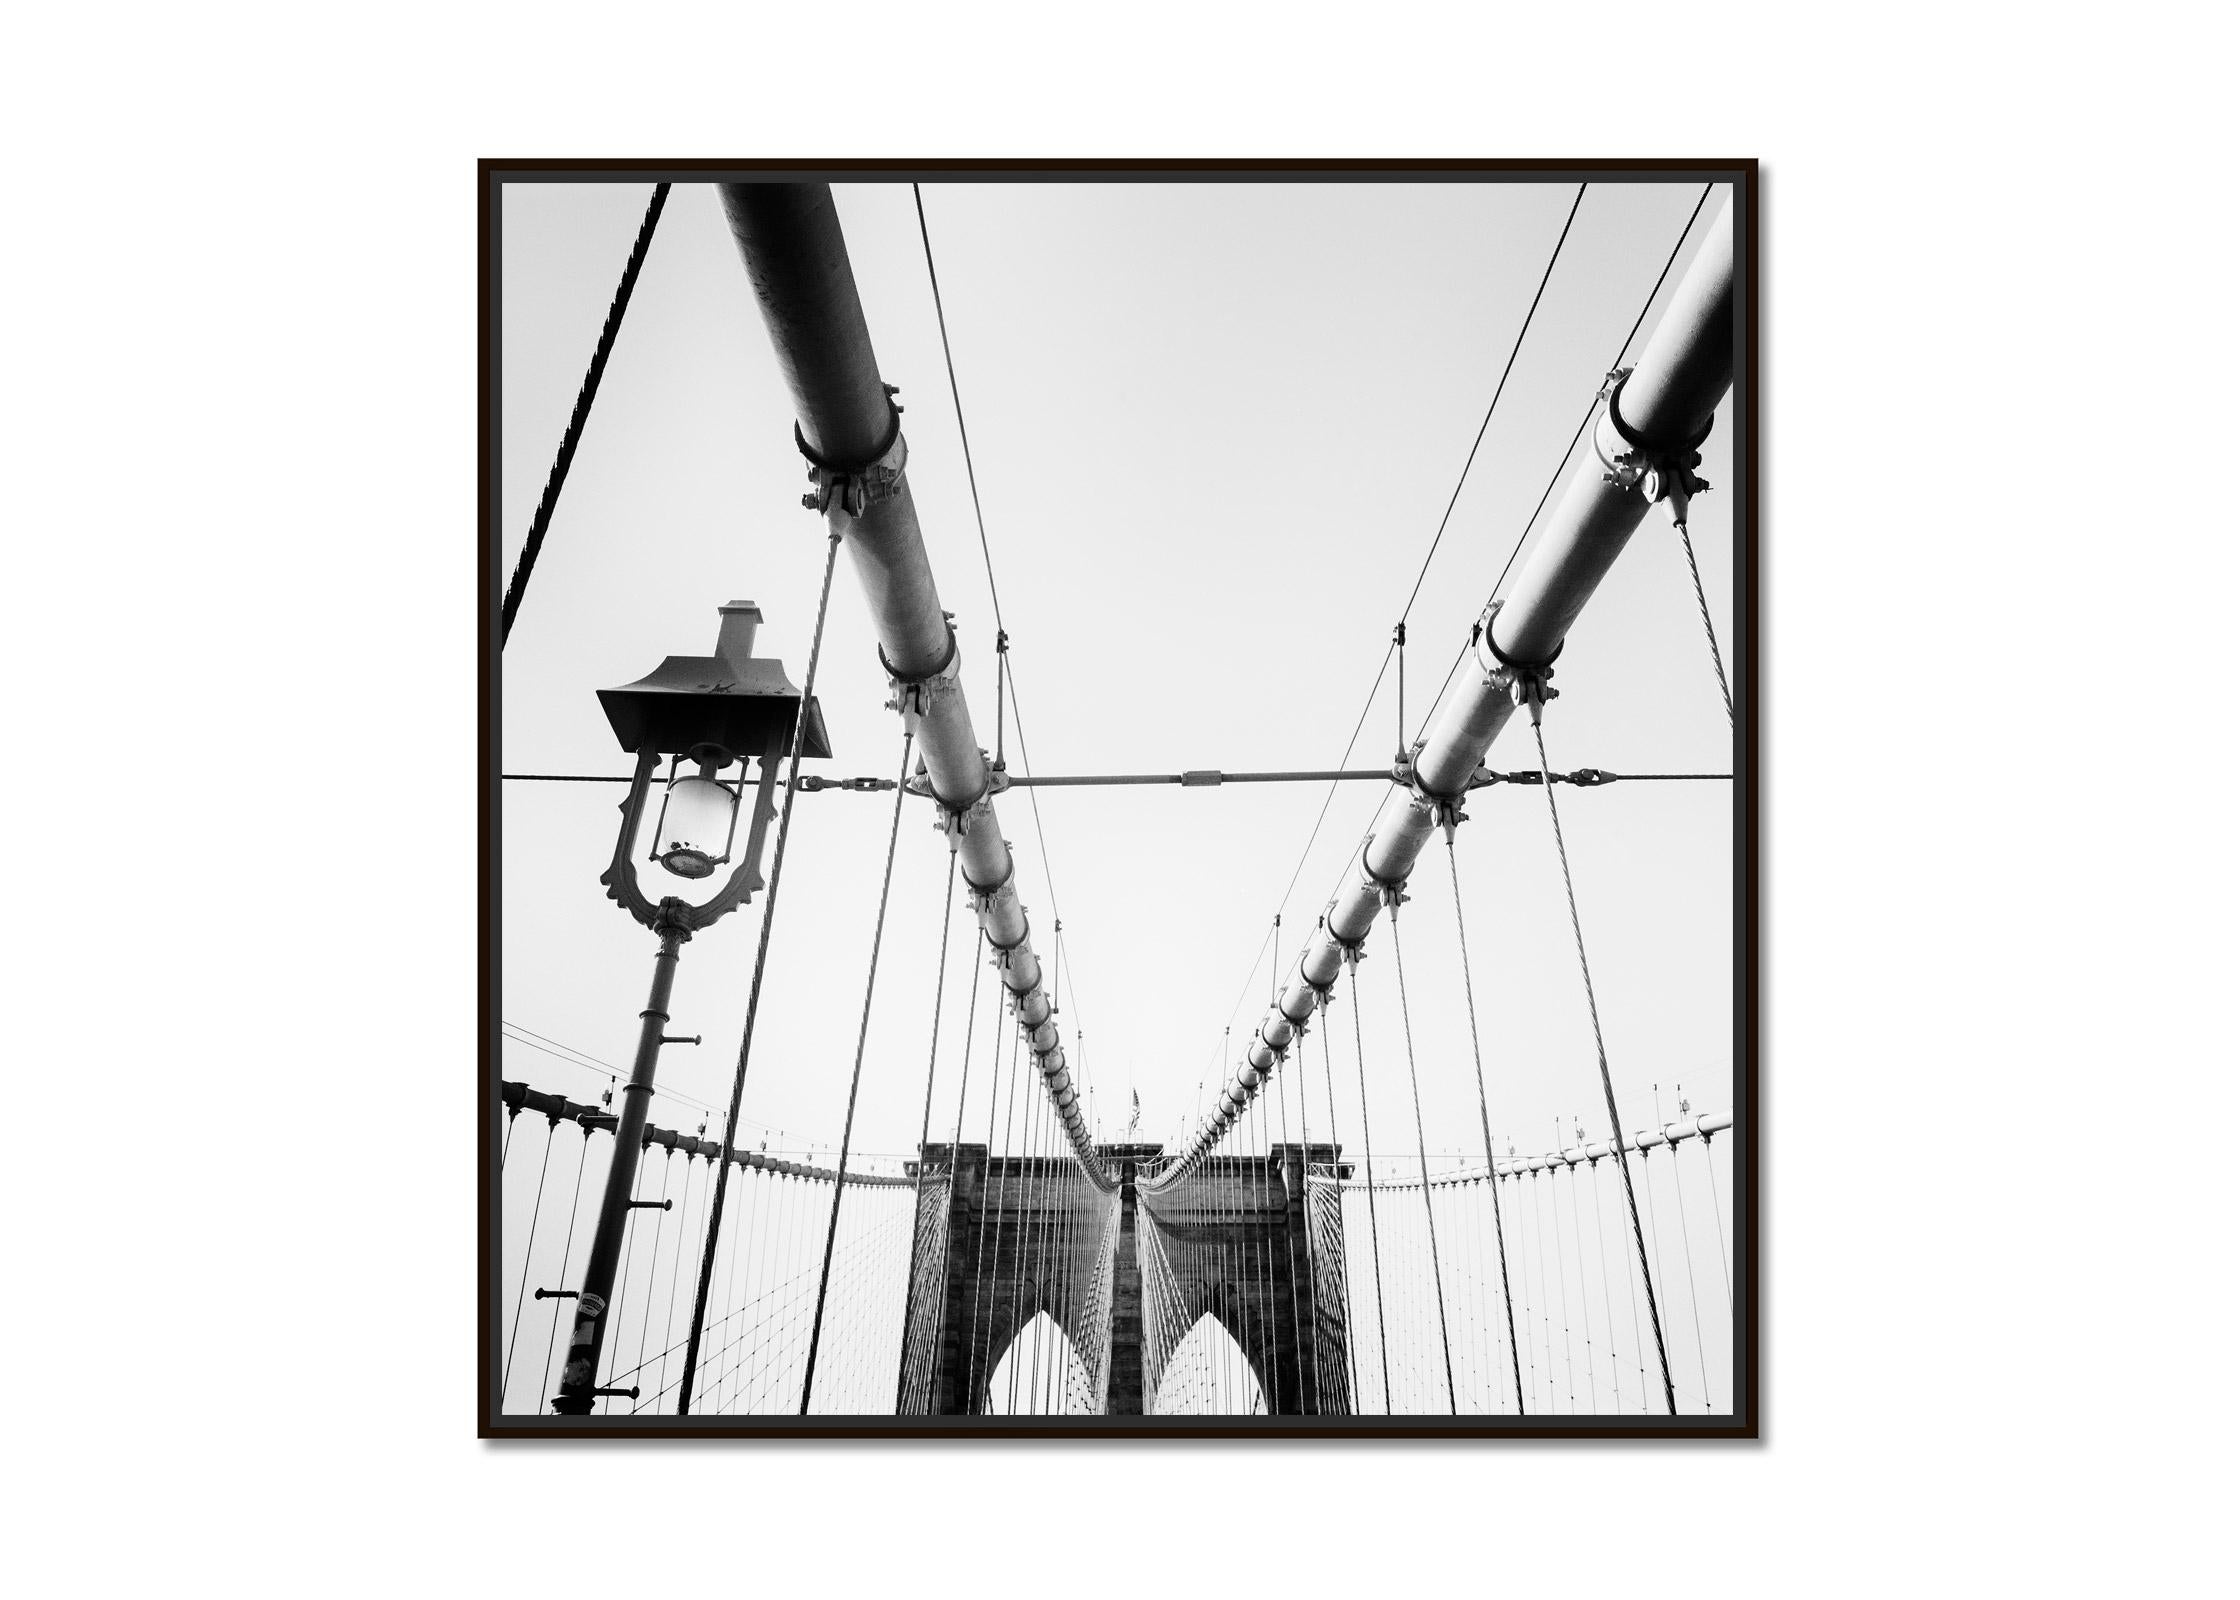 Brooklyn Bridge, archtecture detail, New York, USA, black white cityscape print - Gray Landscape Photograph by Gerald Berghammer